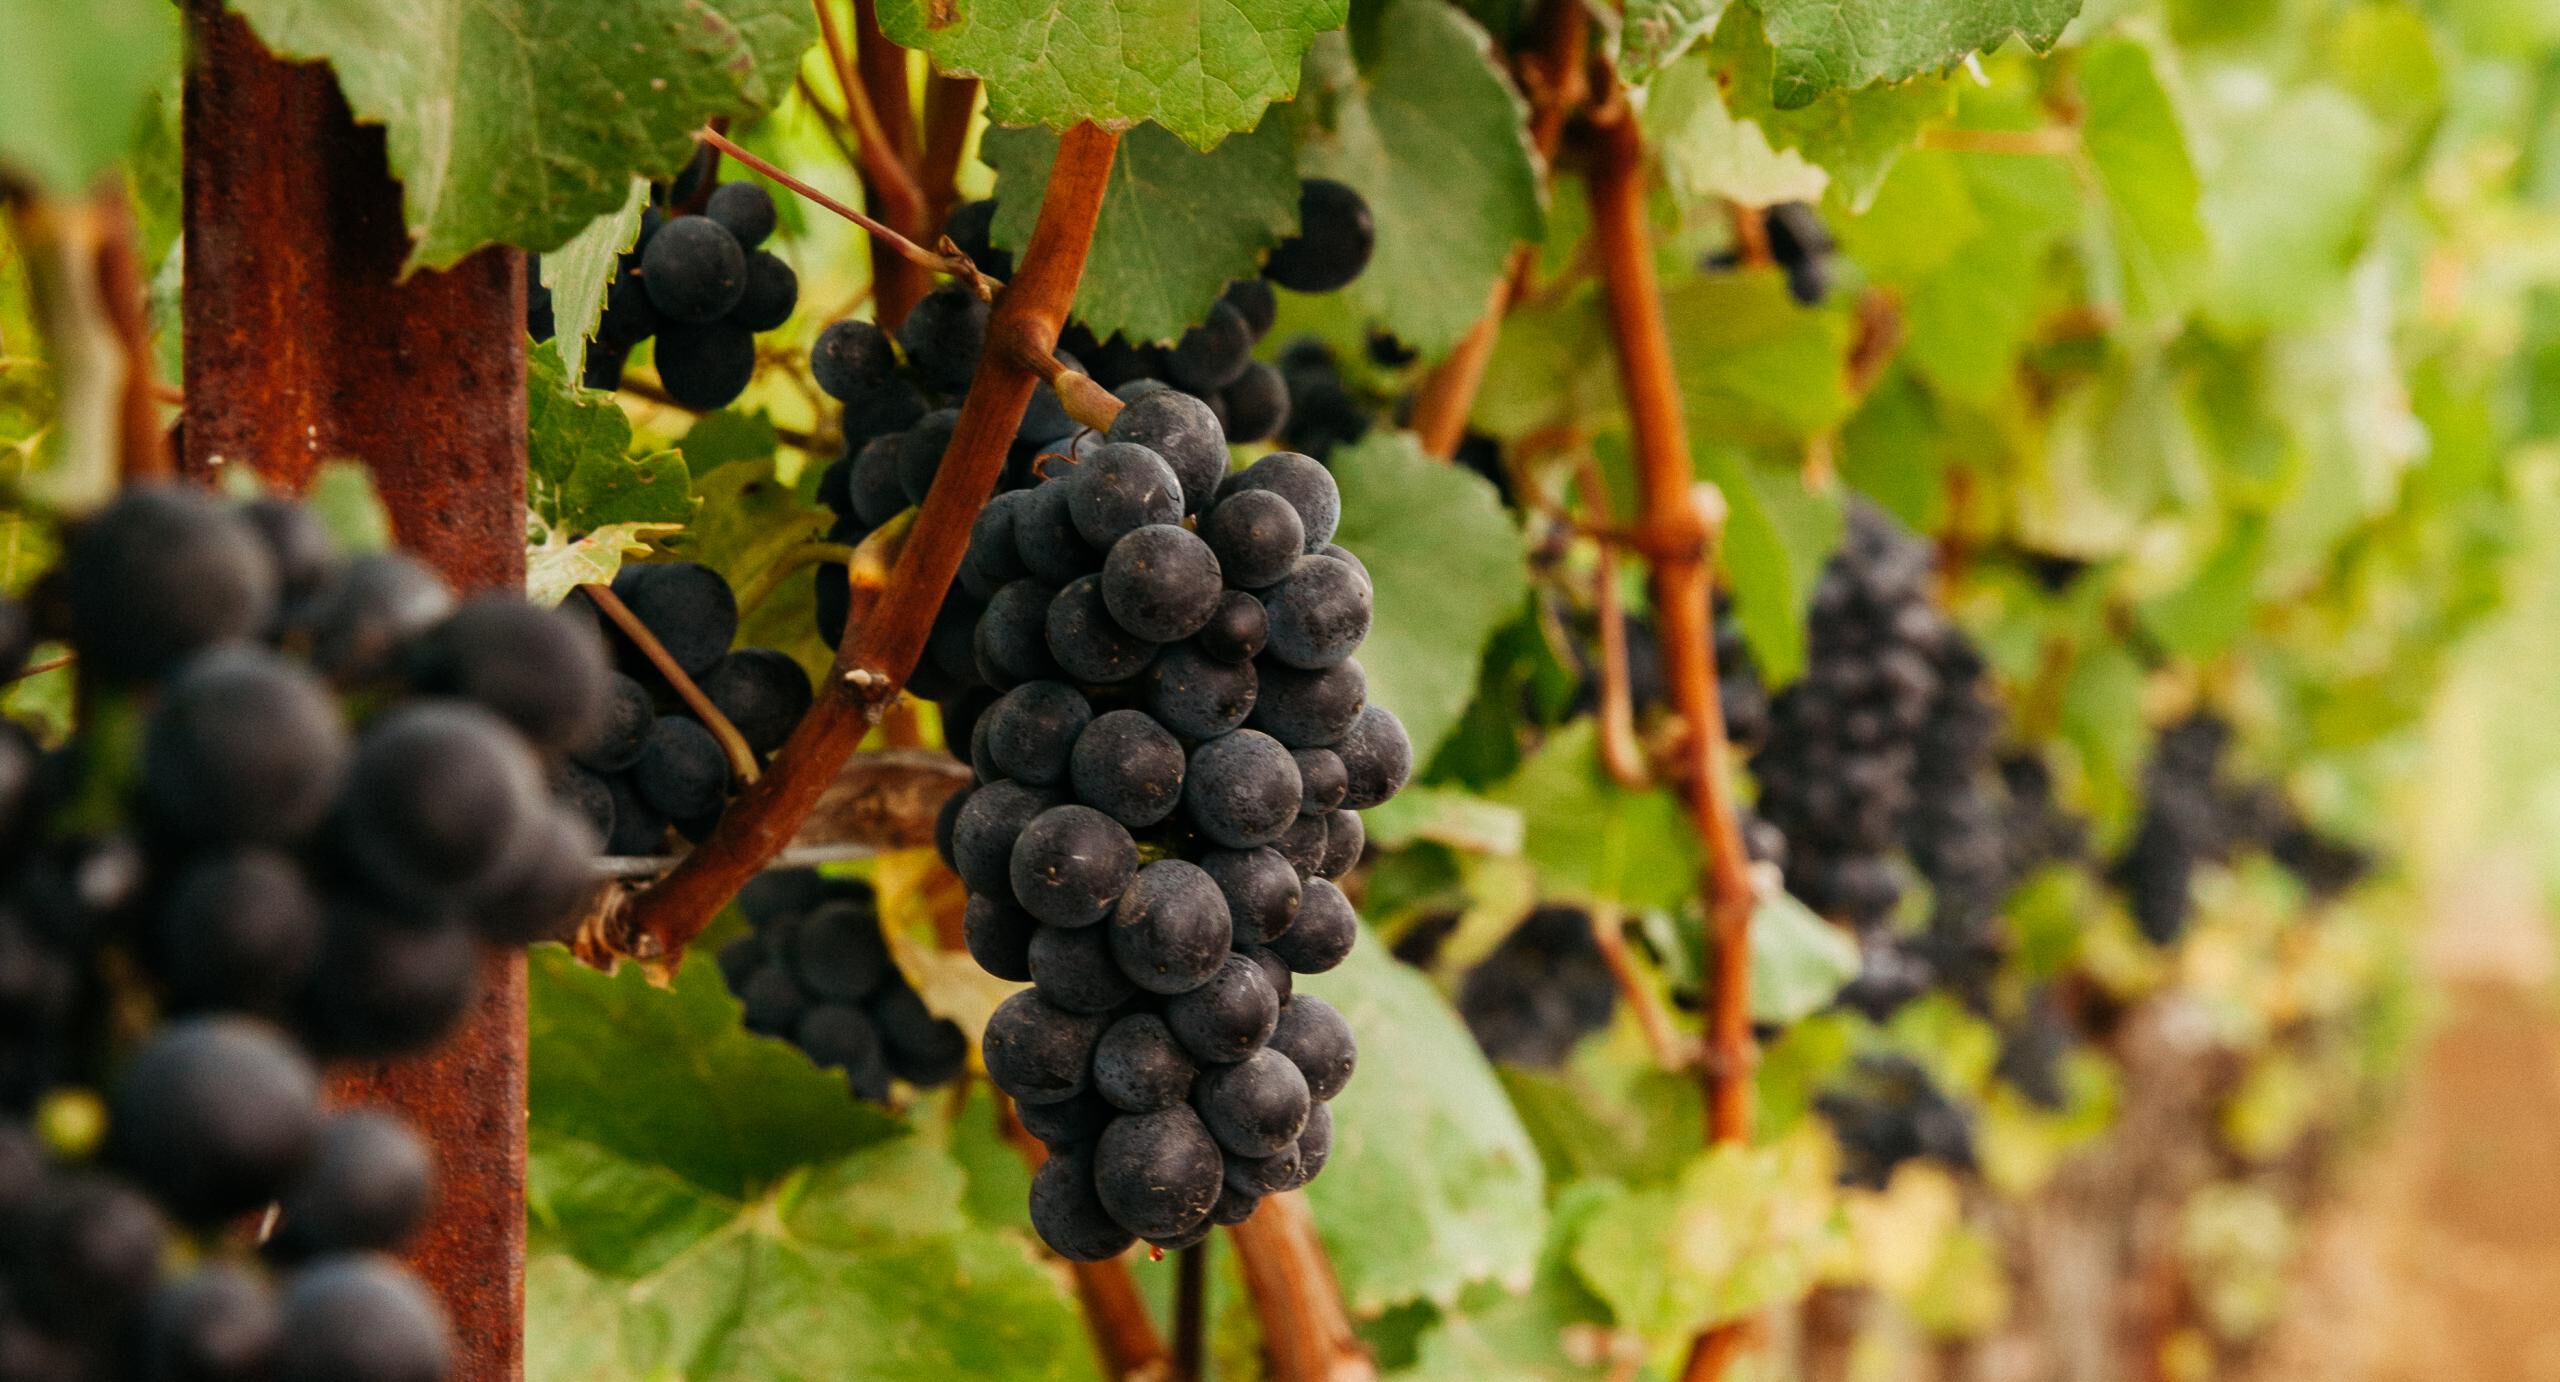 Cluster of grapes on the vine